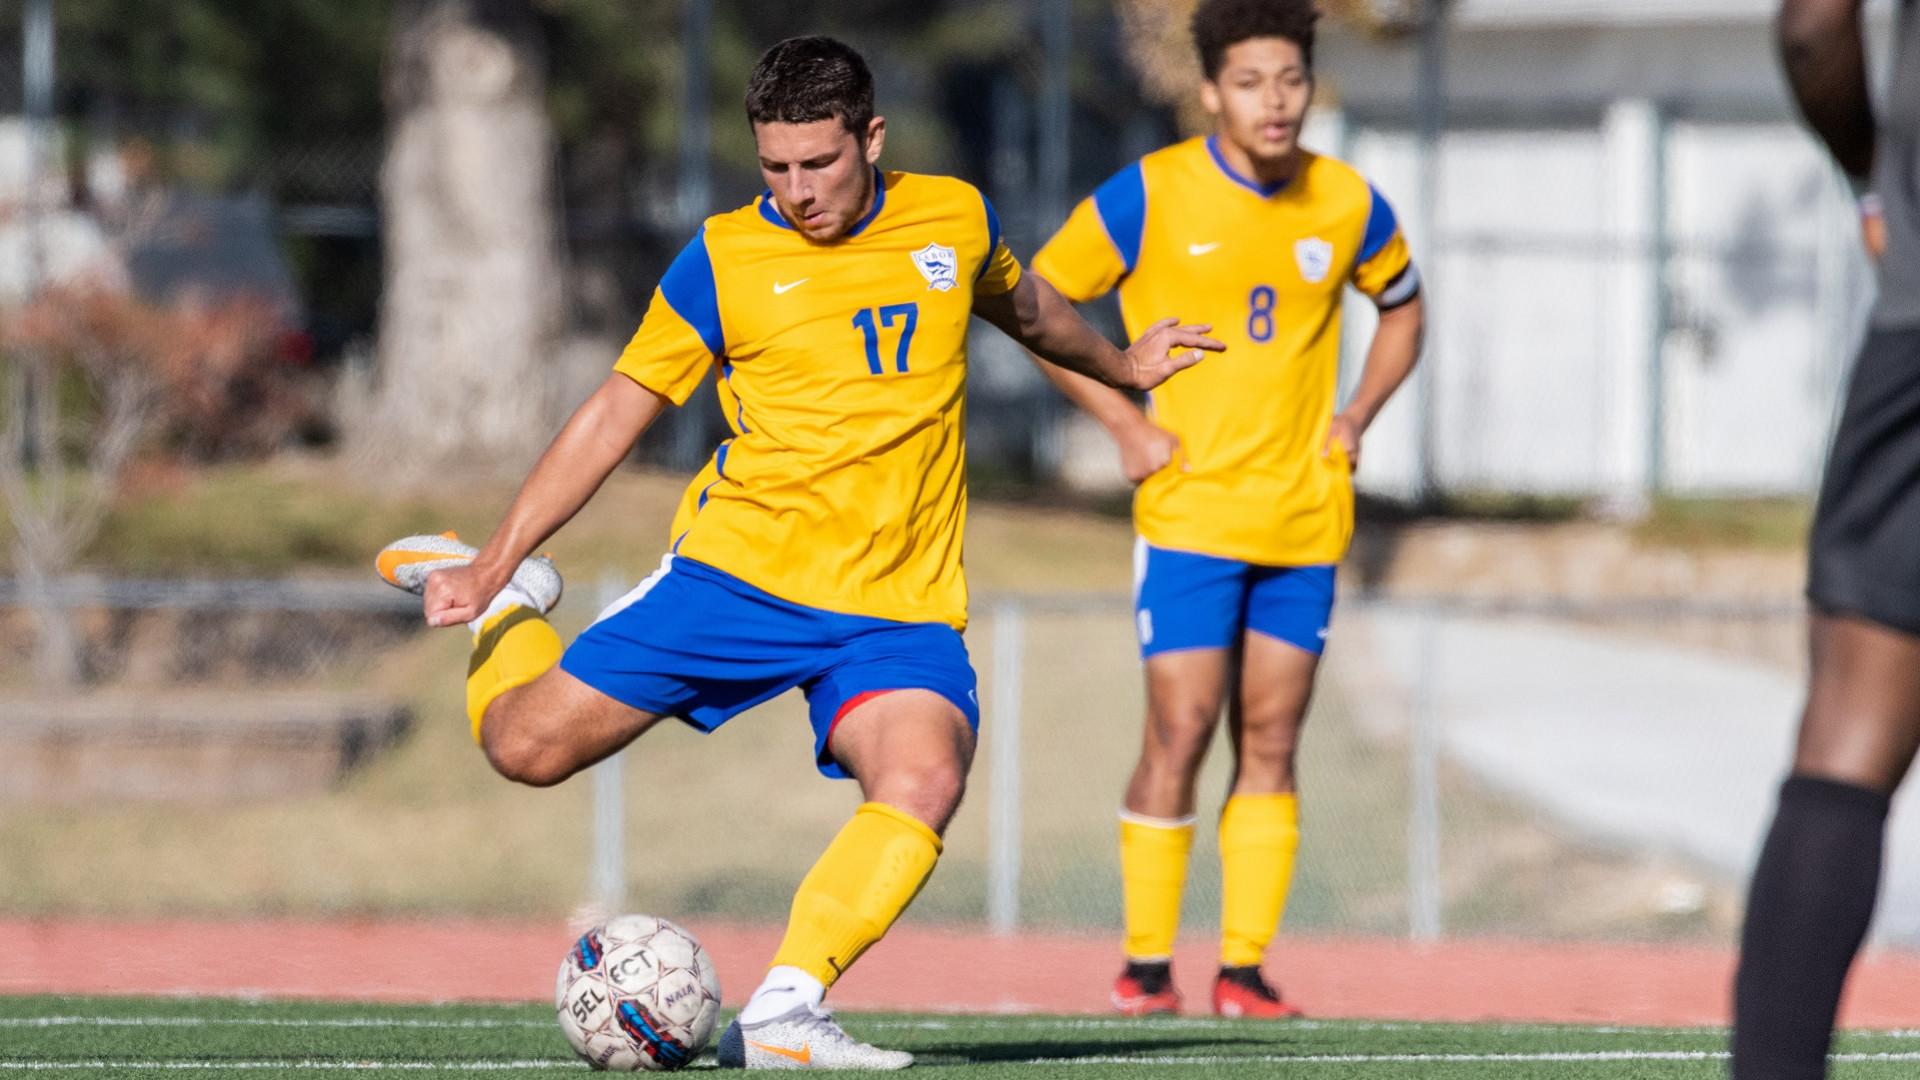 NAIA Men’s Soccer National Championship Opening Round Preview